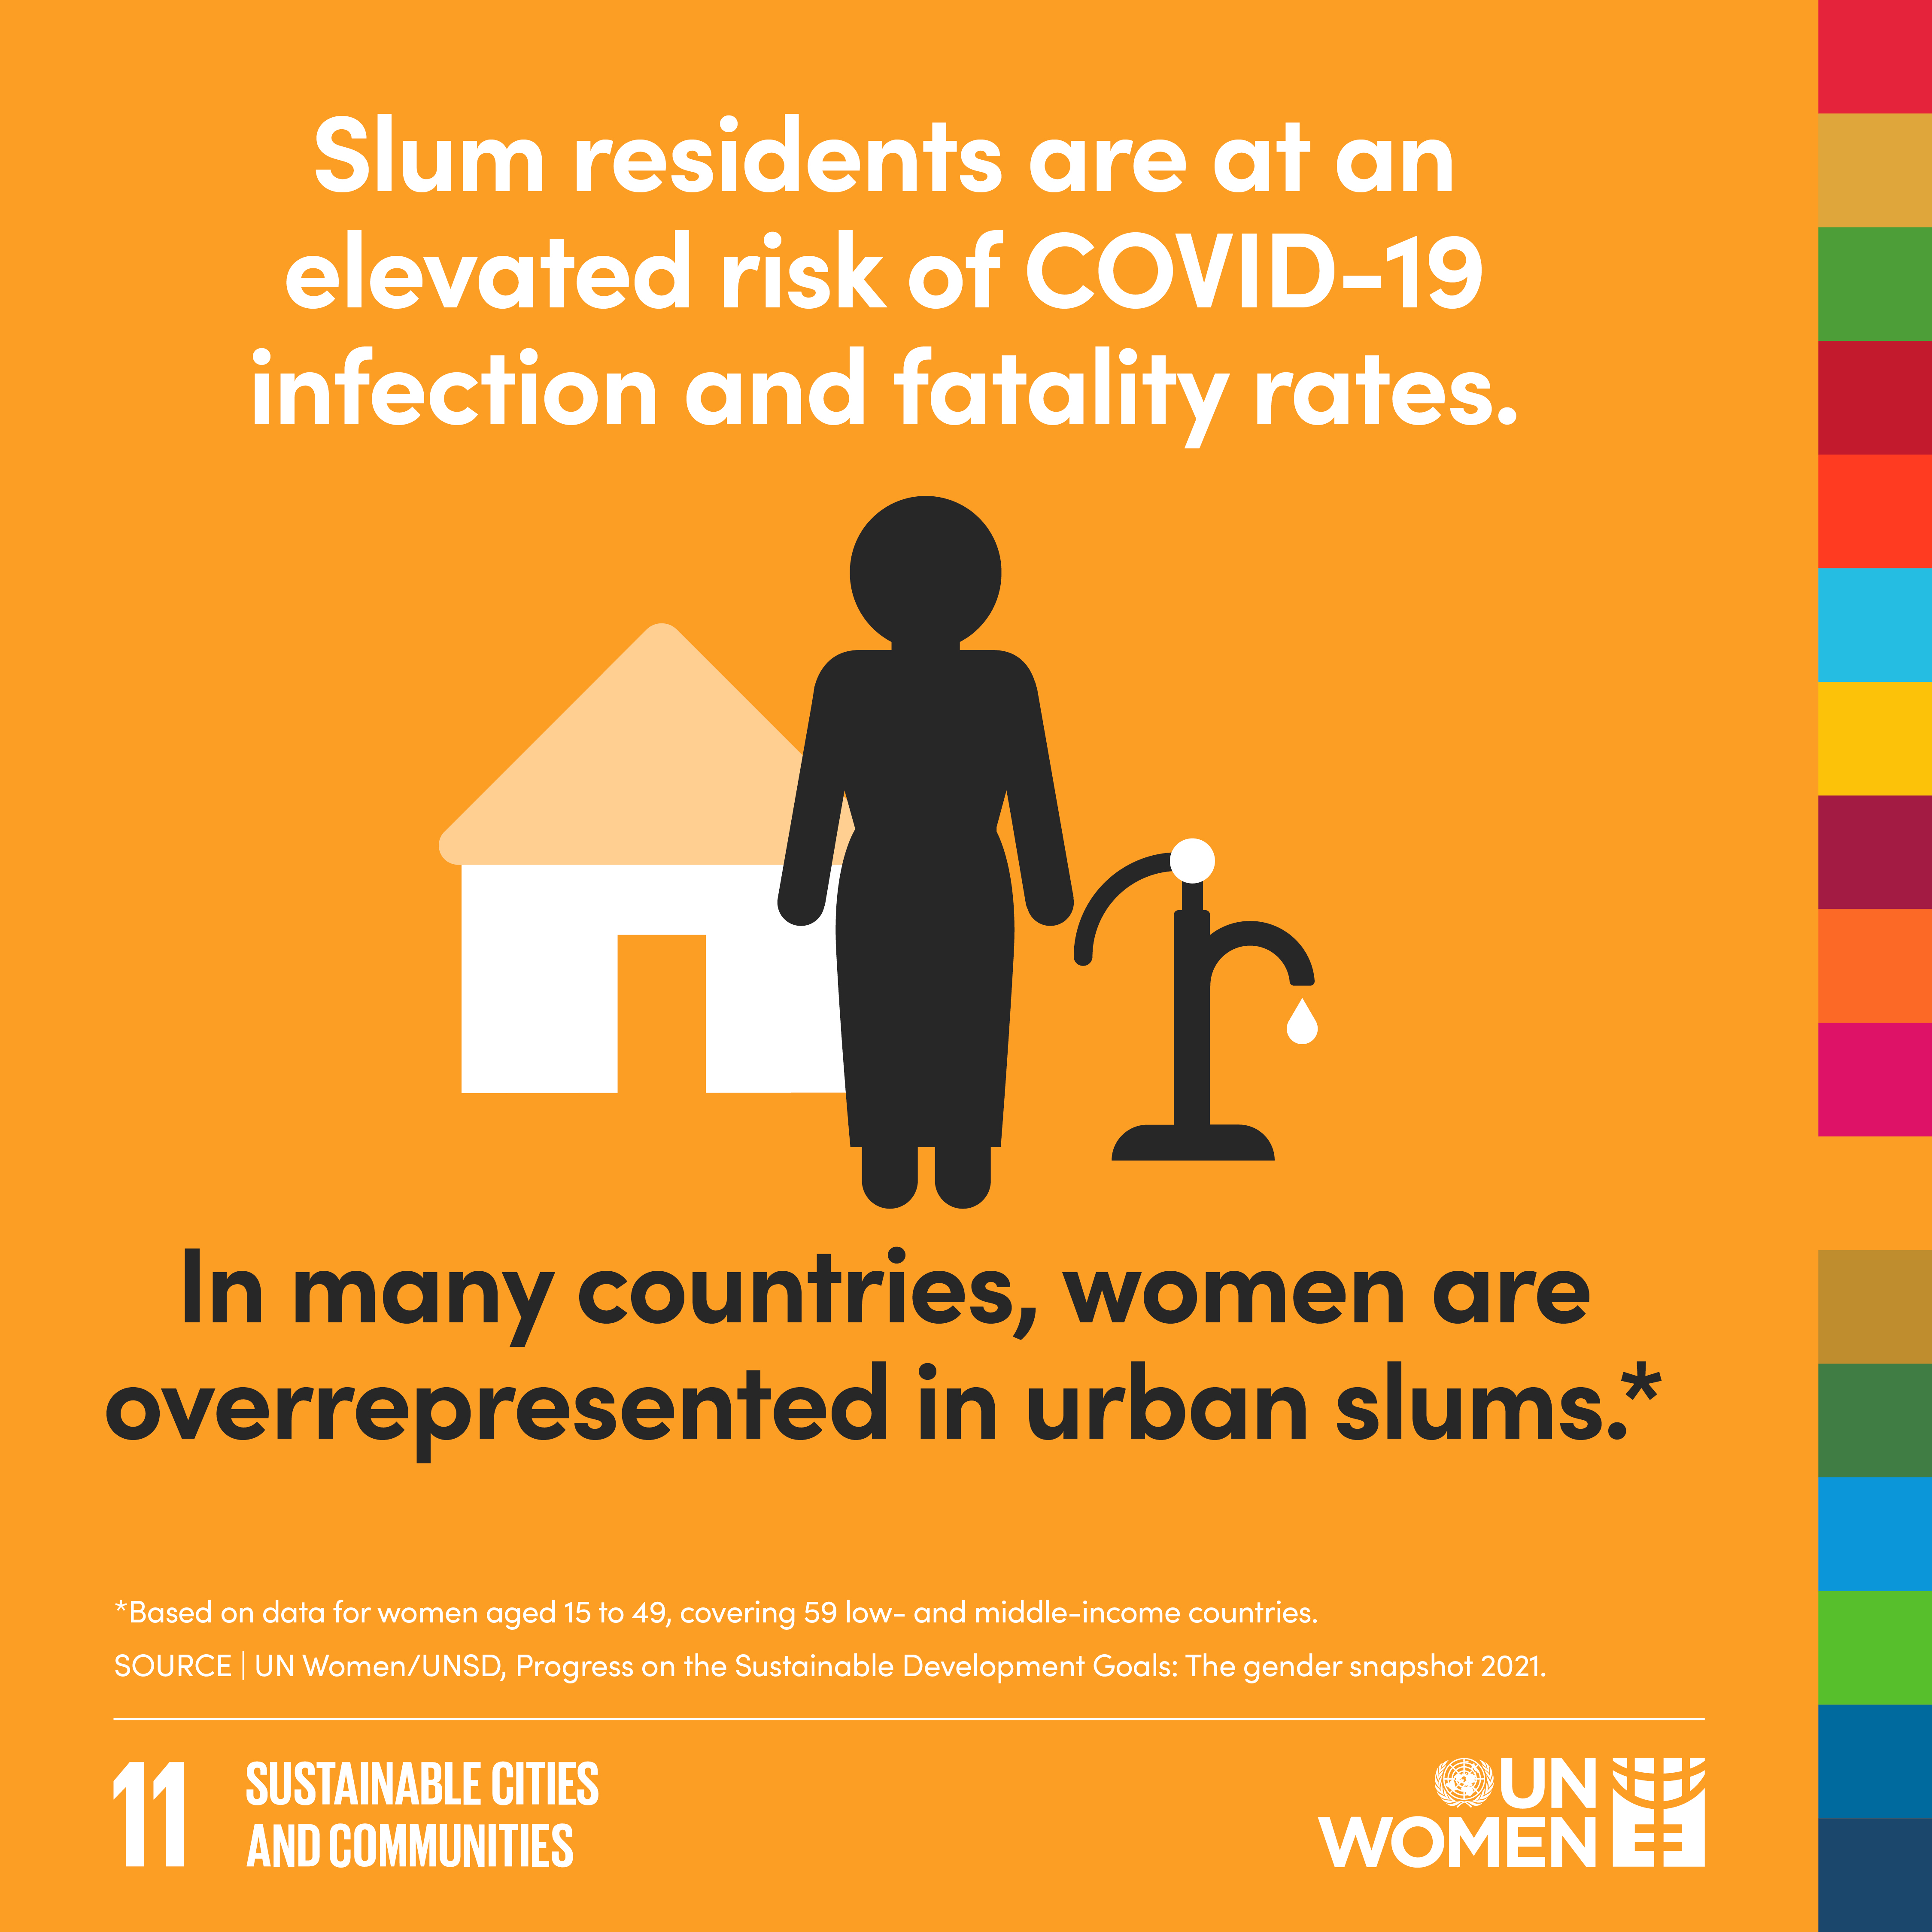 Slum residents are at an elevated risk of COVID-19 infection and fatality rates. In many countries, women are overrepresented in urban slums. 